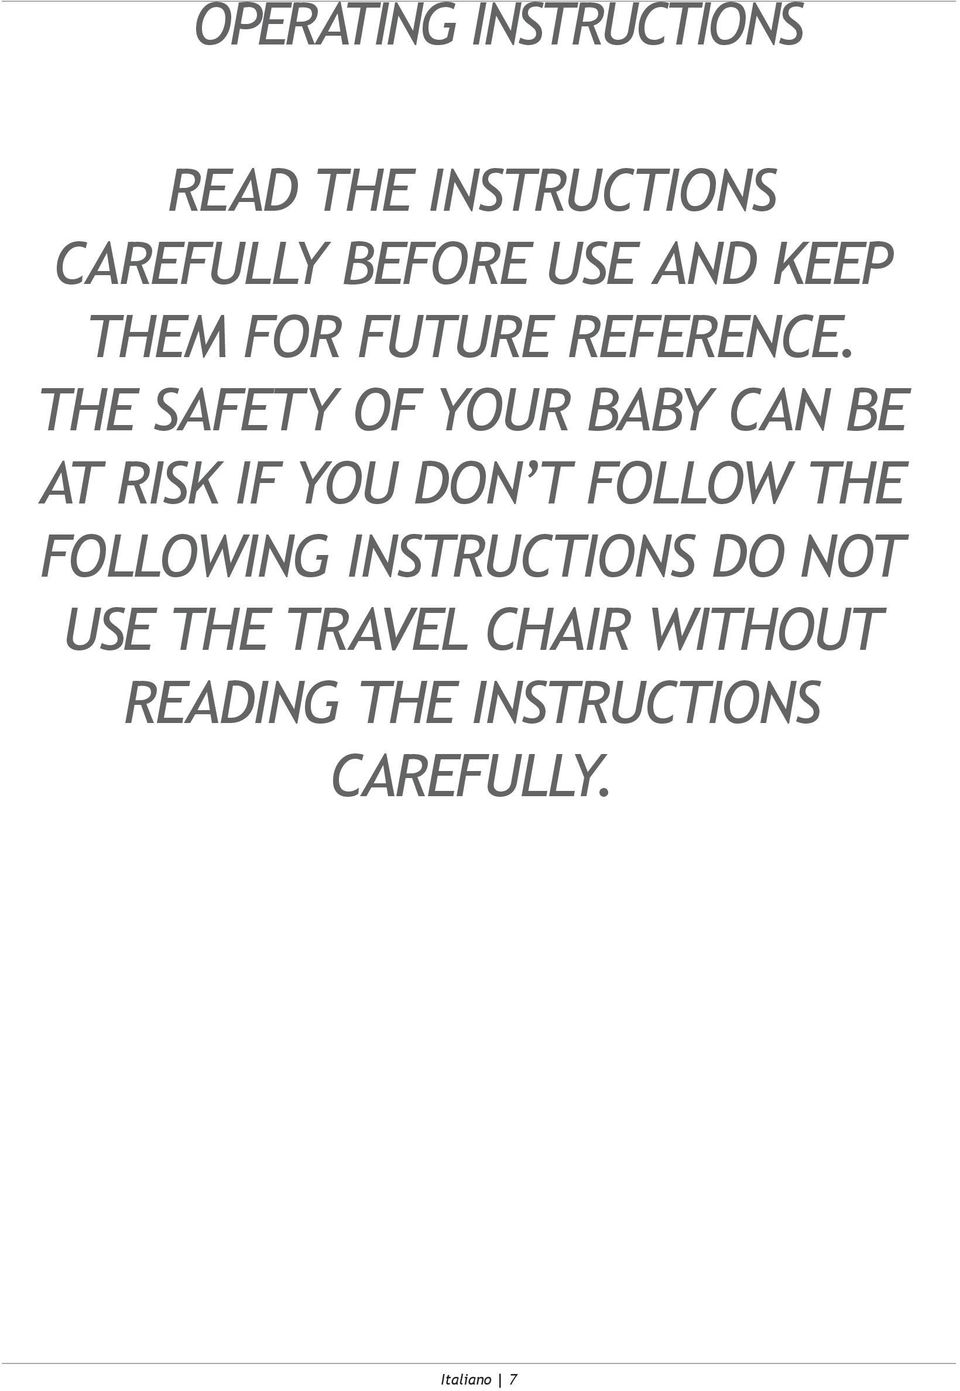 THE SAFETY OF YOUR BABY CAN BE AT RISK IF YOU DON T FOLLOW THE